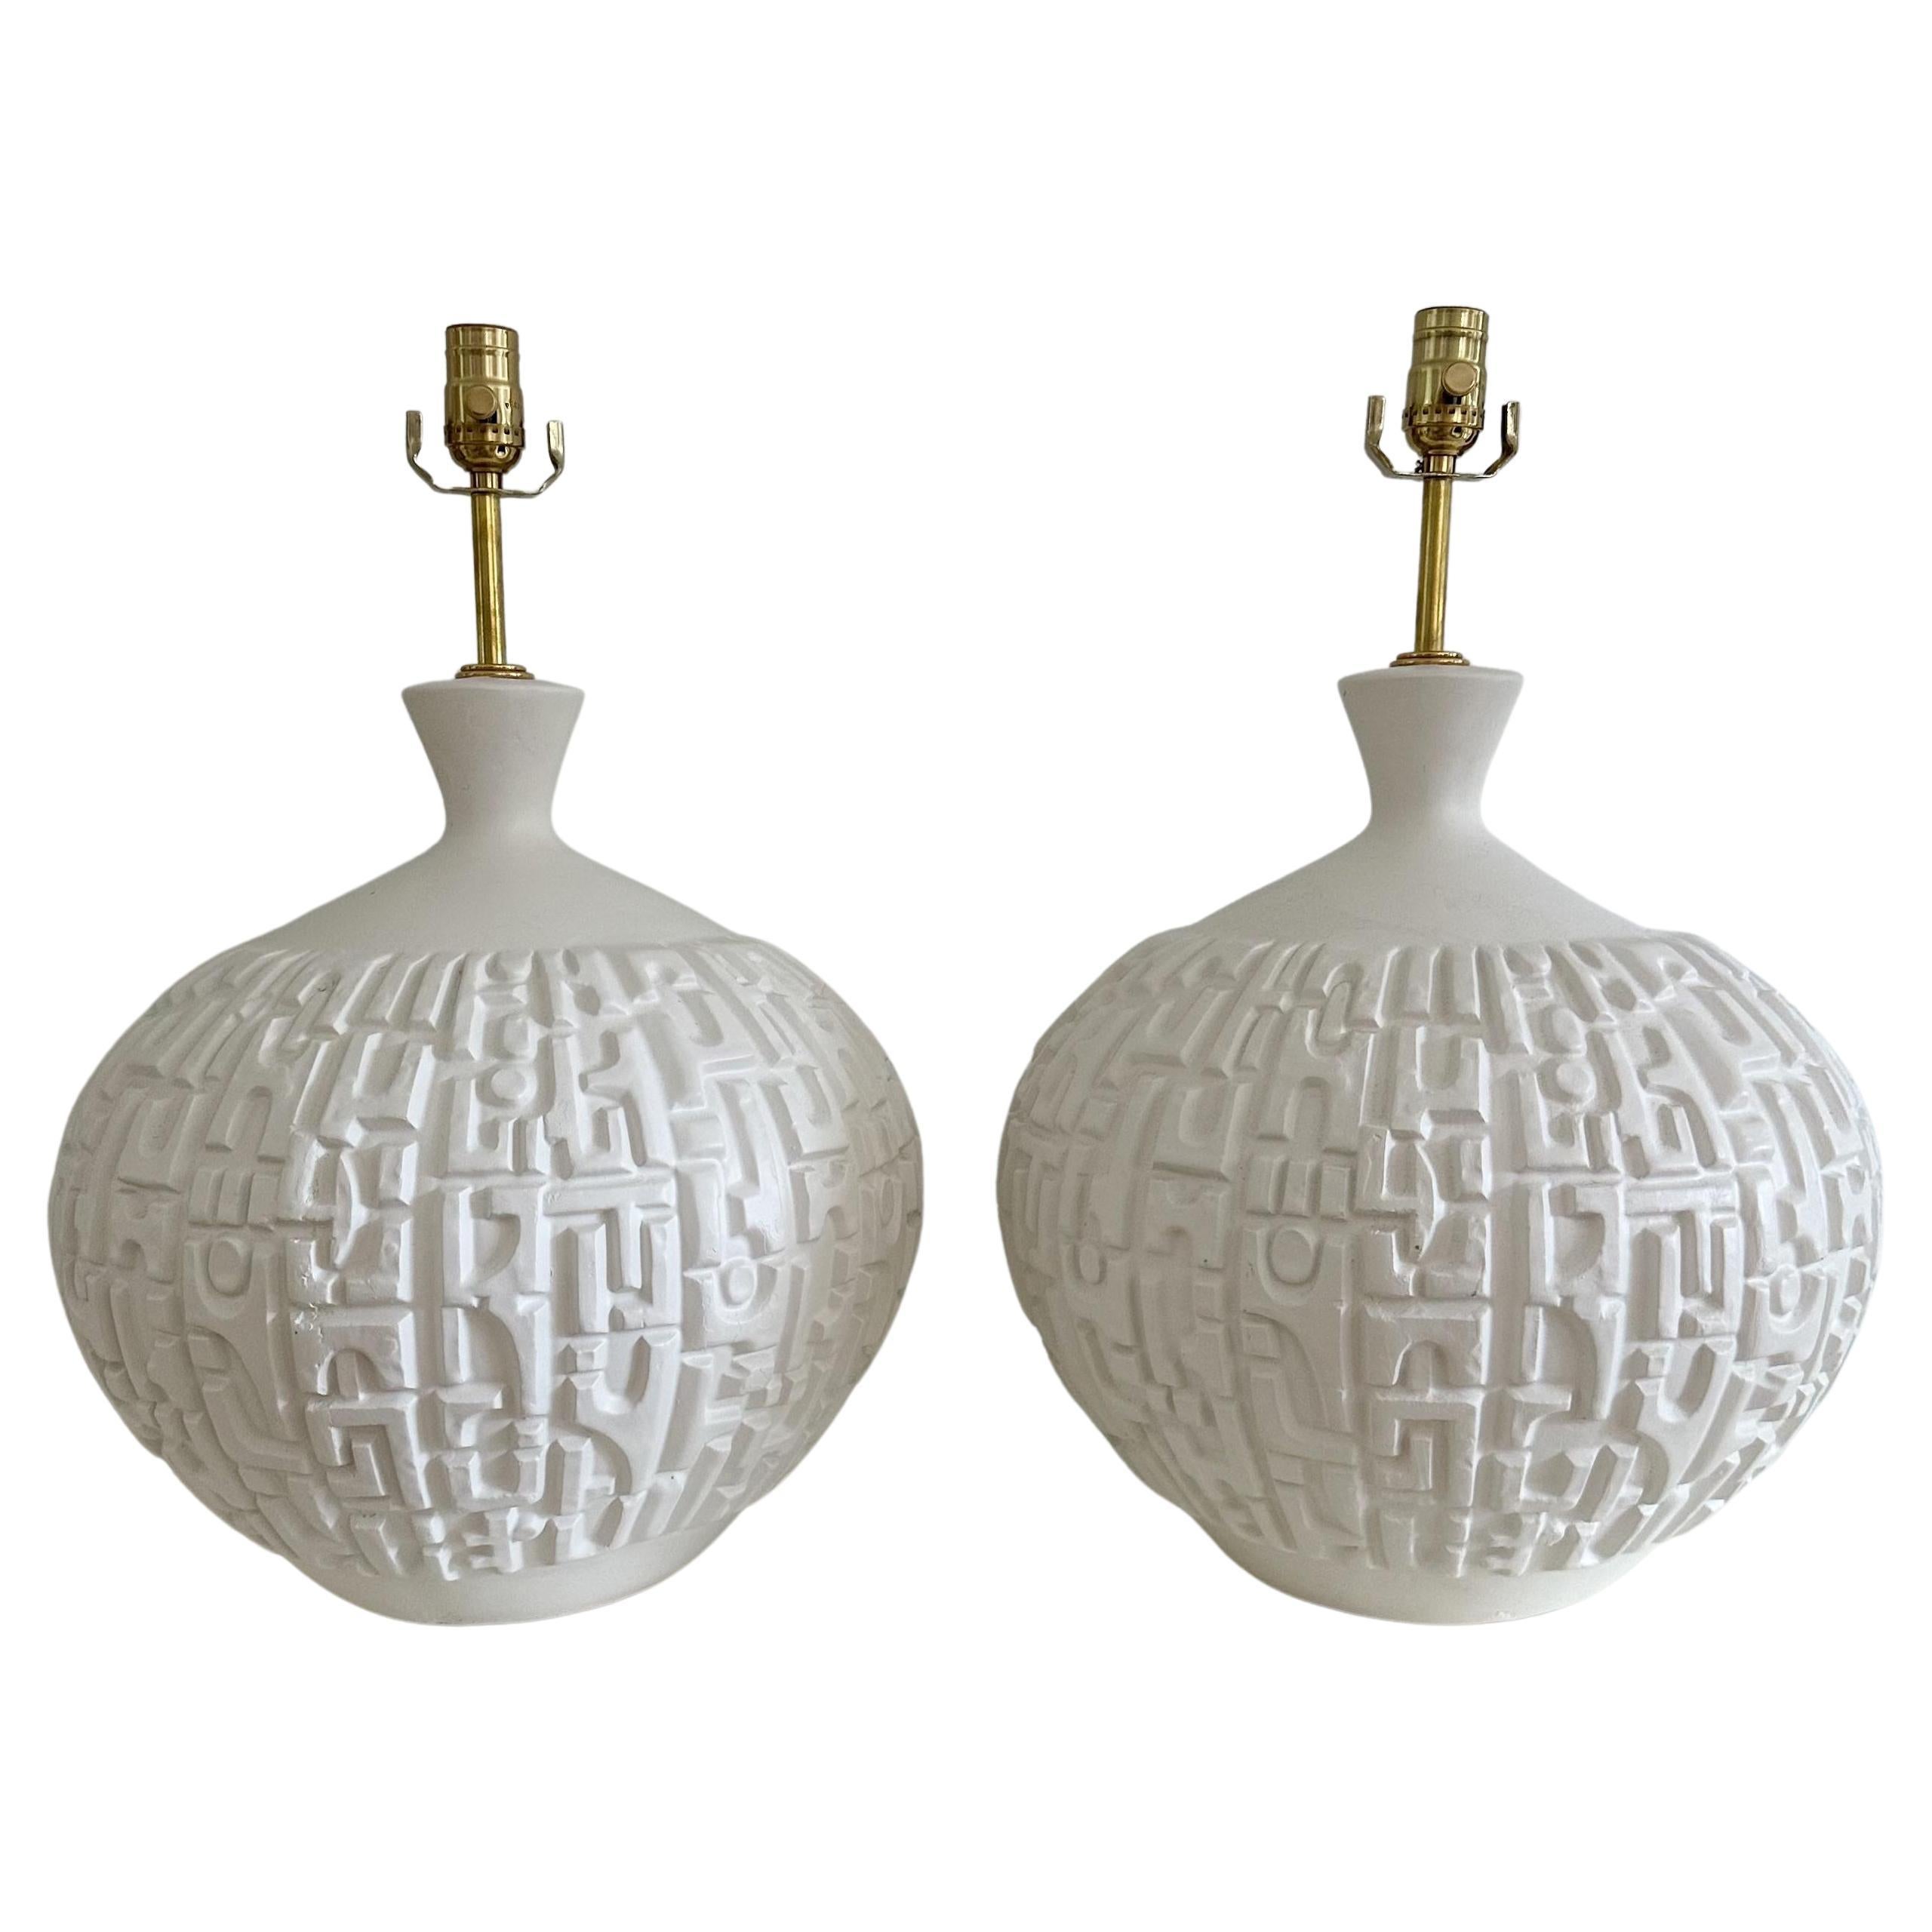 Pair Plaster White Geometric Relief Table Lamps Circa 1970's For Sale